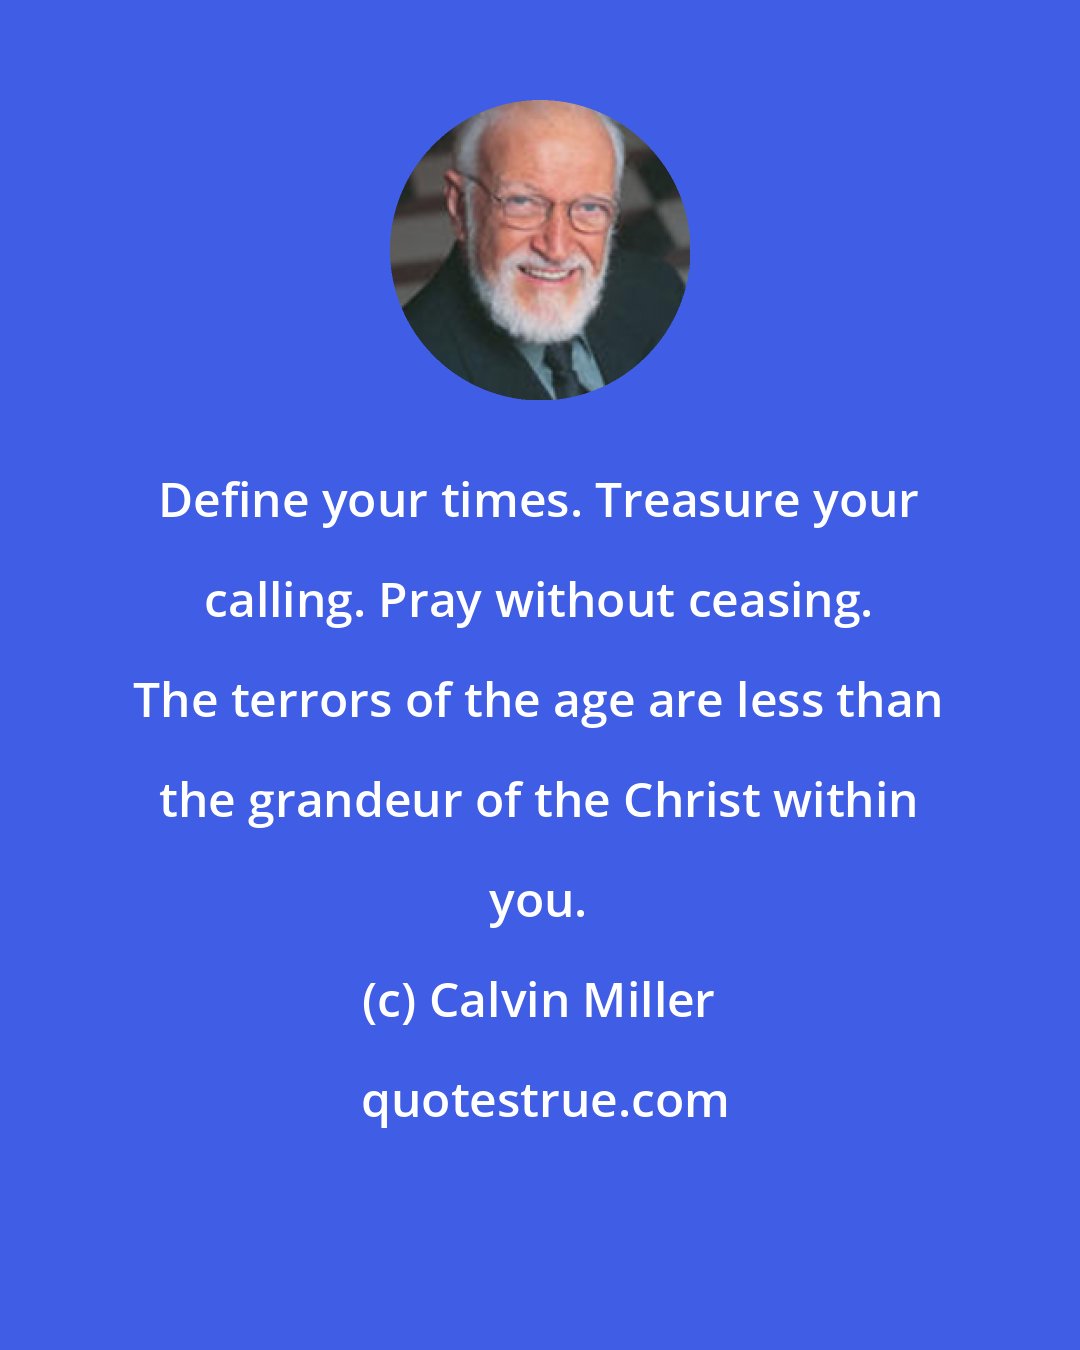 Calvin Miller: Define your times. Treasure your calling. Pray without ceasing. The terrors of the age are less than the grandeur of the Christ within you.